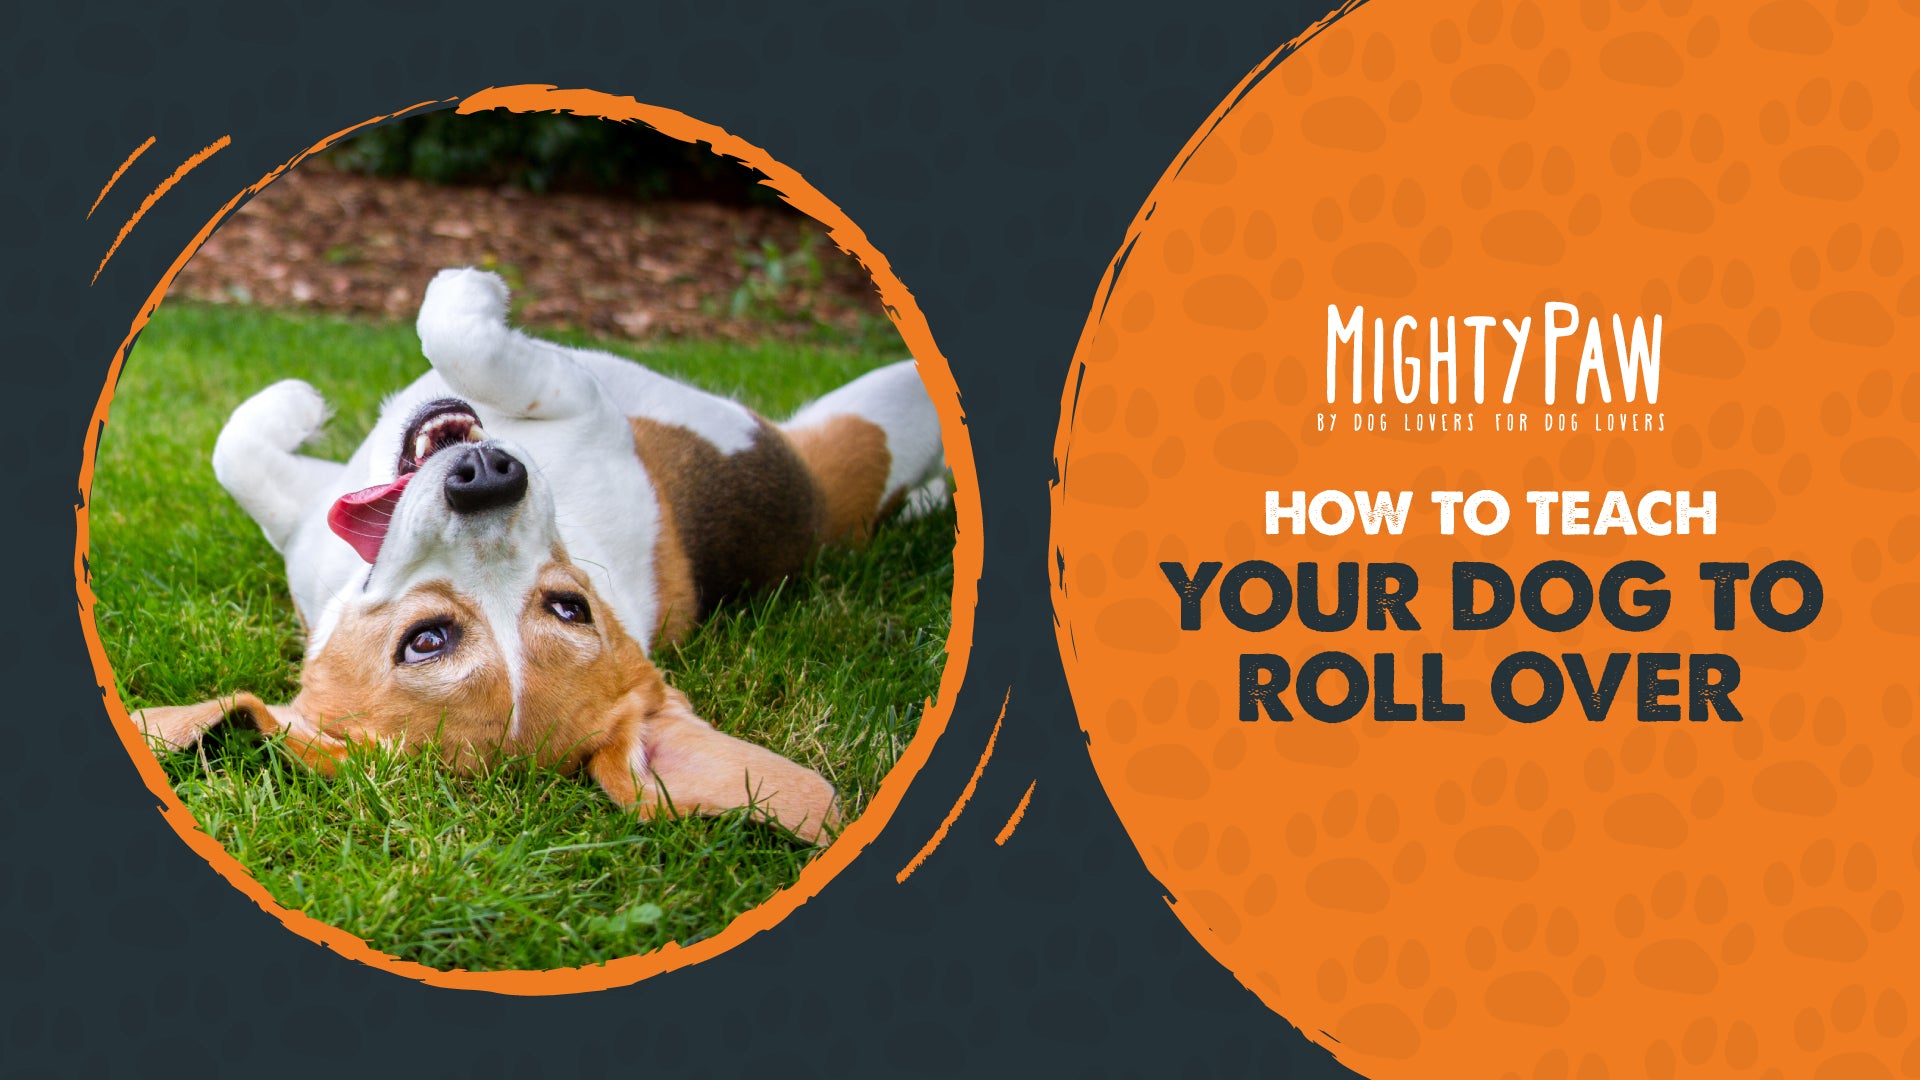 How to teach your dog to roll over